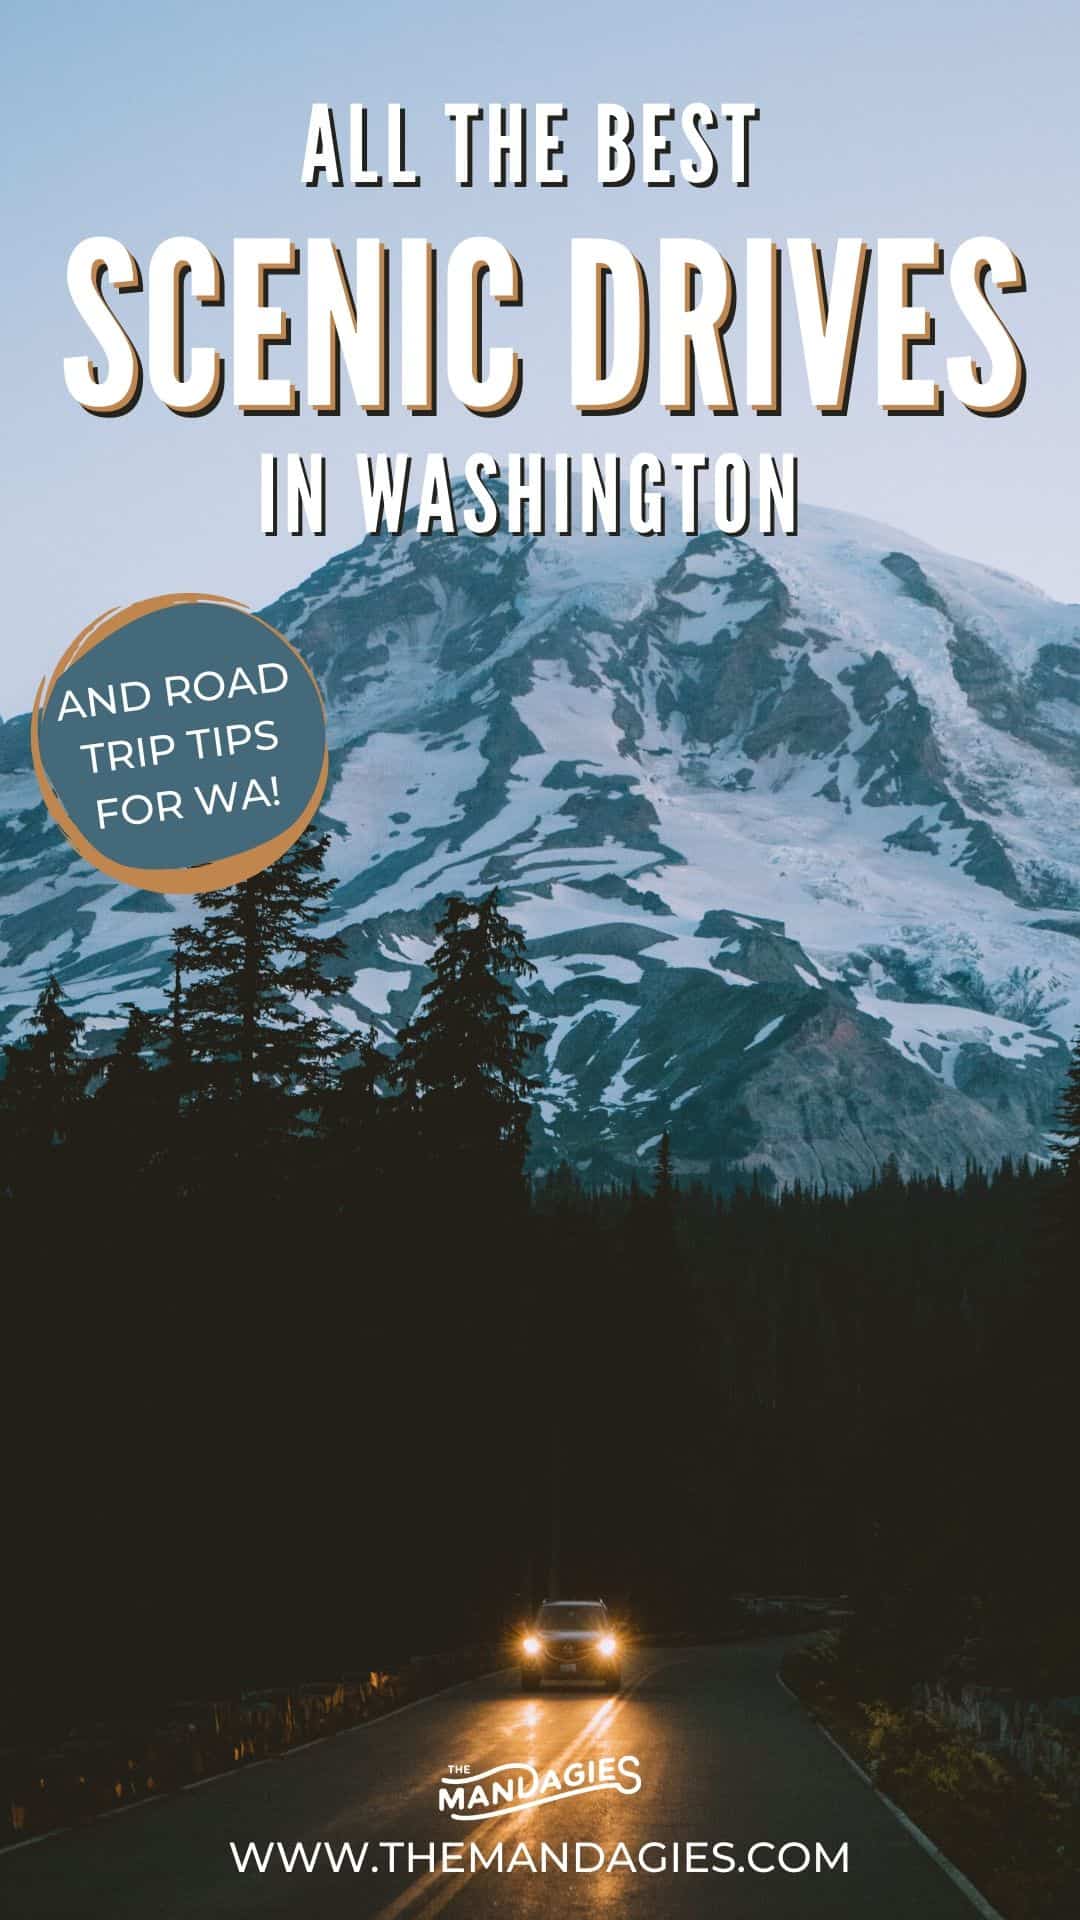 Looking for an easy way to get our and explore the Evergreen State this season? We're sharing the best scenic drives in Washington state right here! Save this post for future inspiration for a road trip in Washington State! #washingtonstate #olympicnationalpark #northcascades #mountrainier #roadtrip #scenicdrive #travel #washington #PNW #pacificnorthwest #mountains #USA